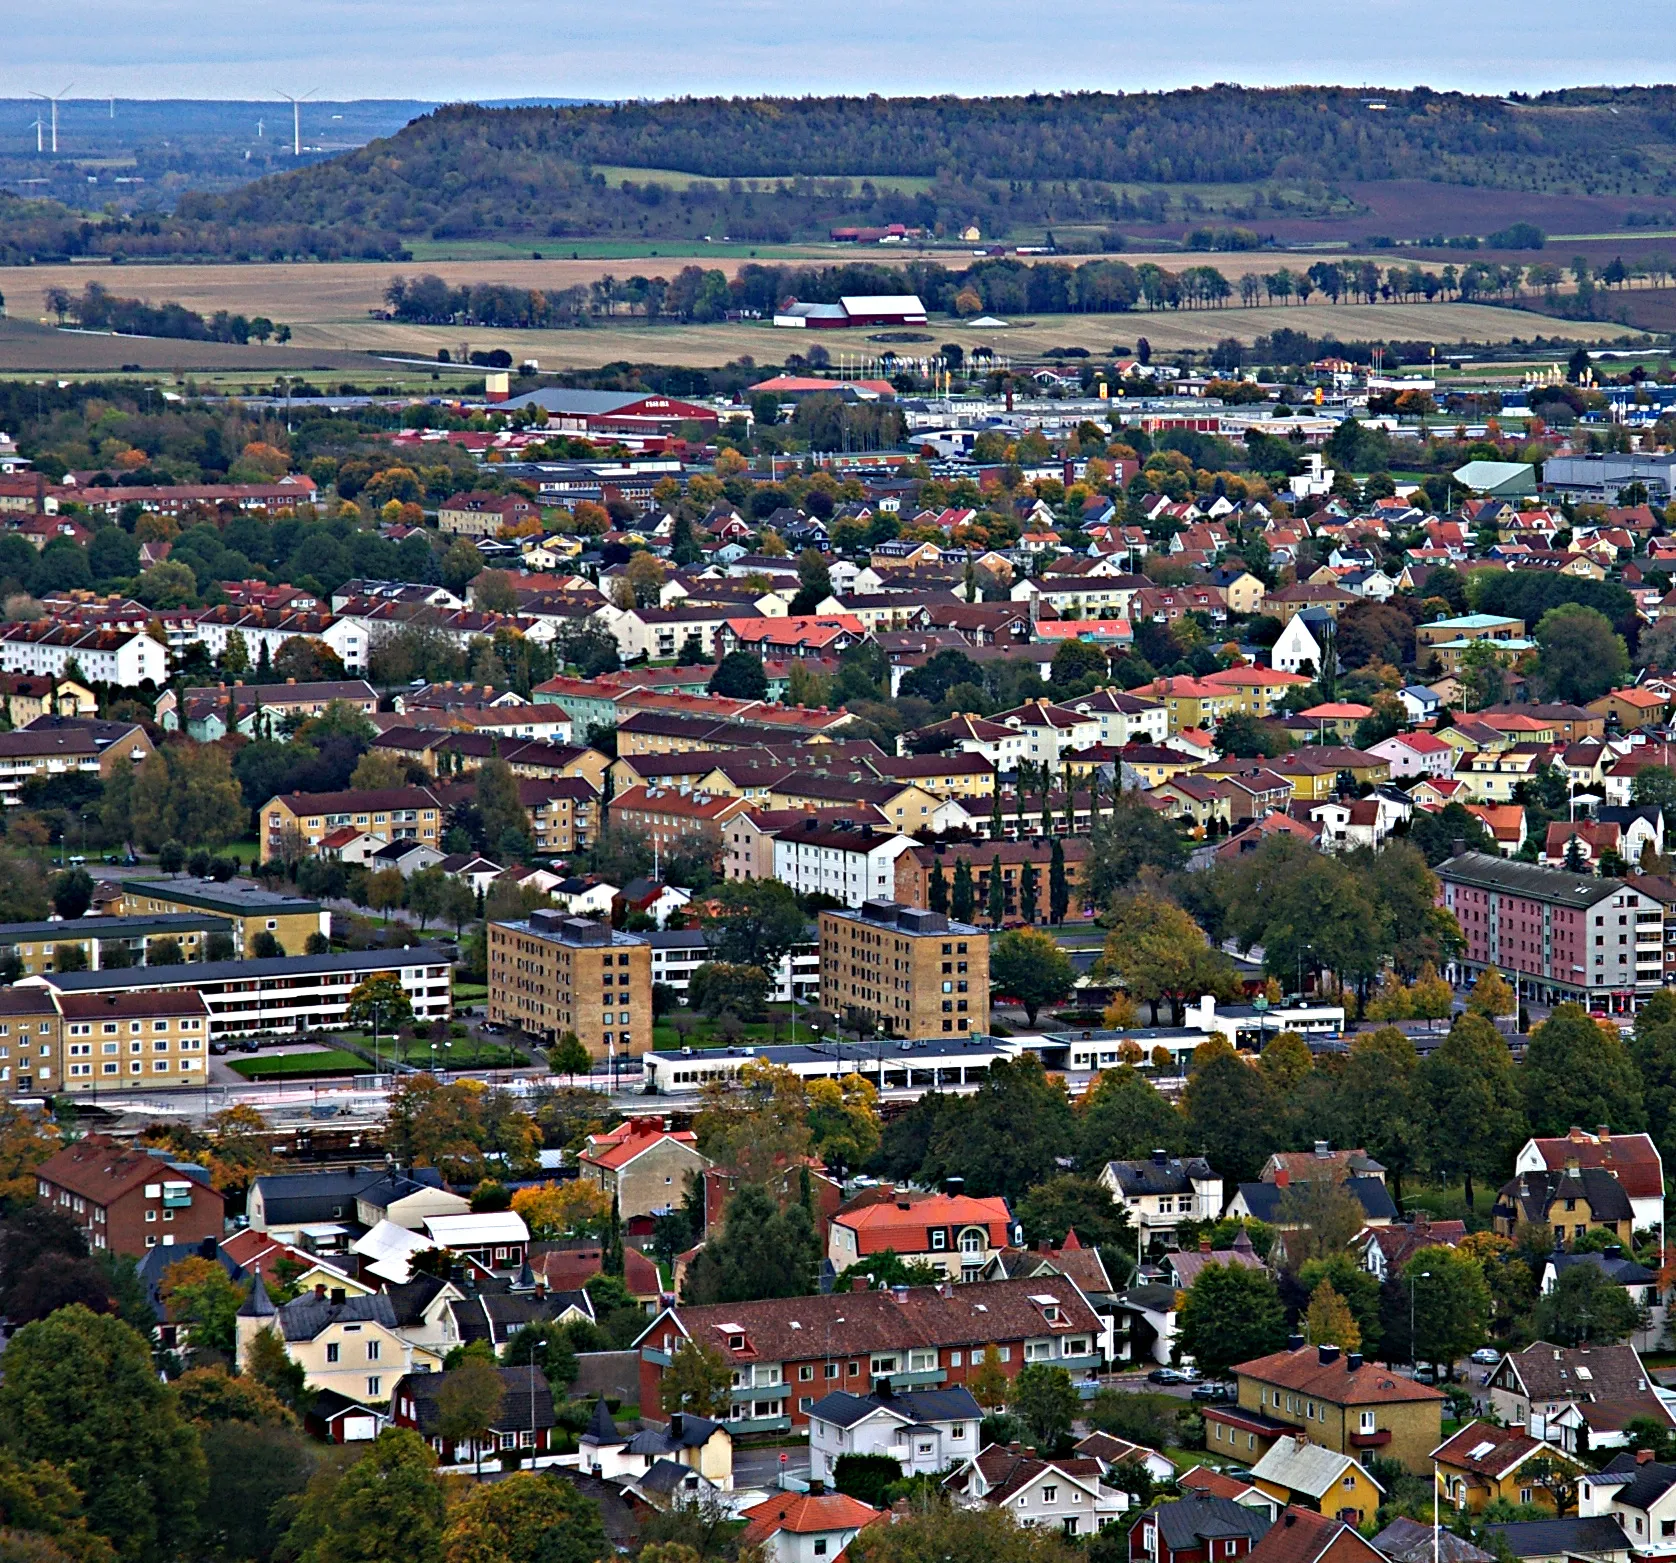 Photo showing: The town Falköping in Västergötland, Sweden. Photographed from Mösseberg viewing tower. In the background the table mountain Ålleberg is seen.